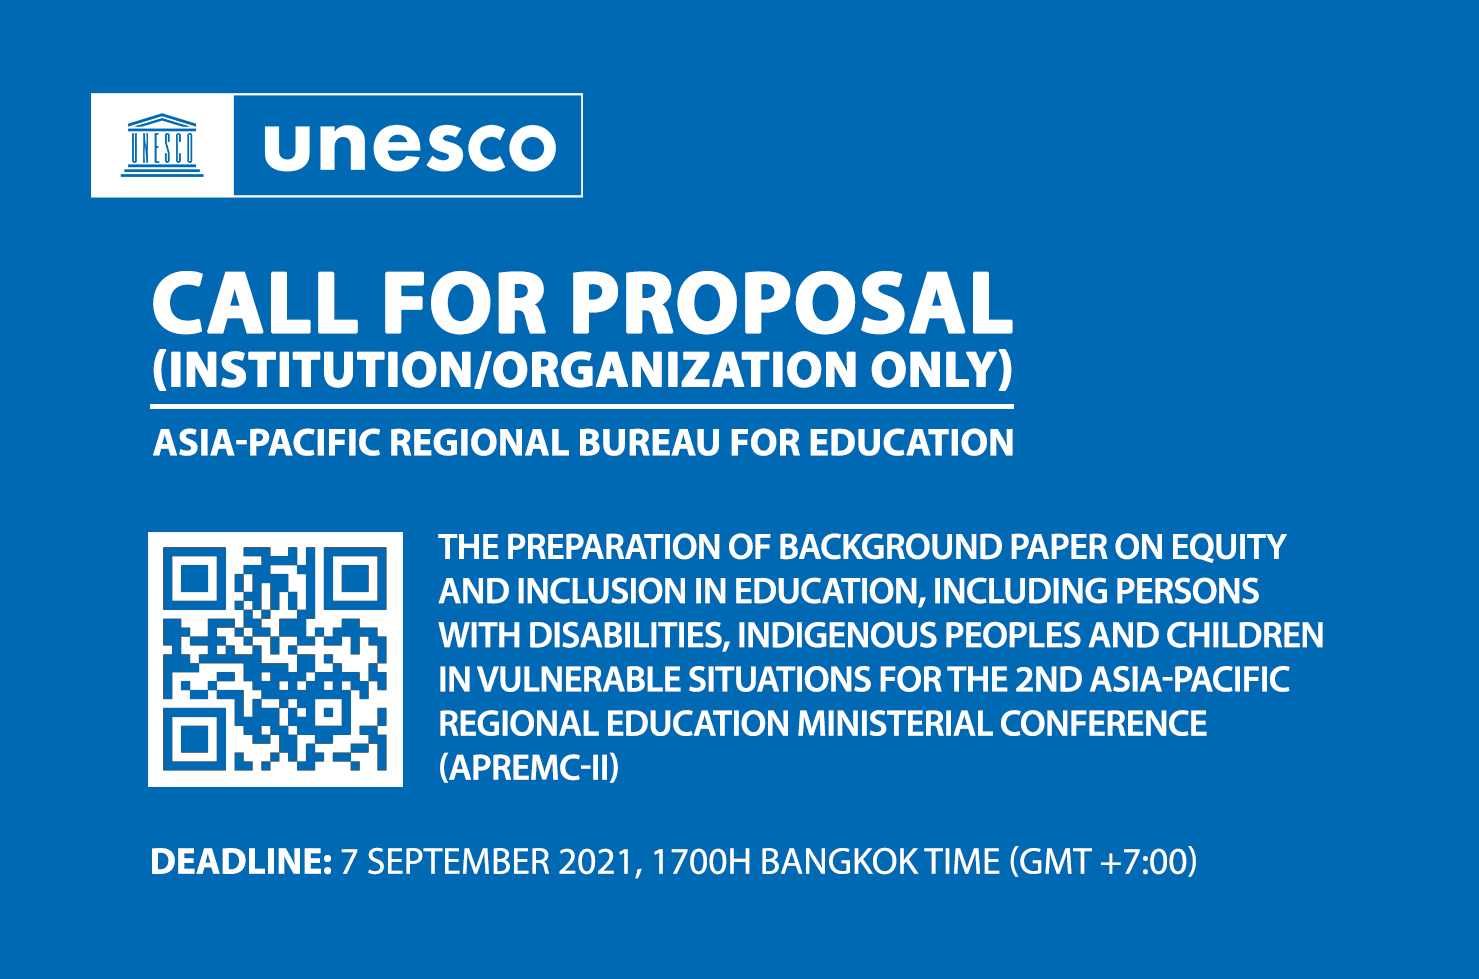 Call for Proposal: The preparation of background paper on equity and inclusion in education, including persons with disabilities, indigenous peoples and children in vulnerable situations for the 2nd Asia-Pacific Regional Education Ministerial Conference (